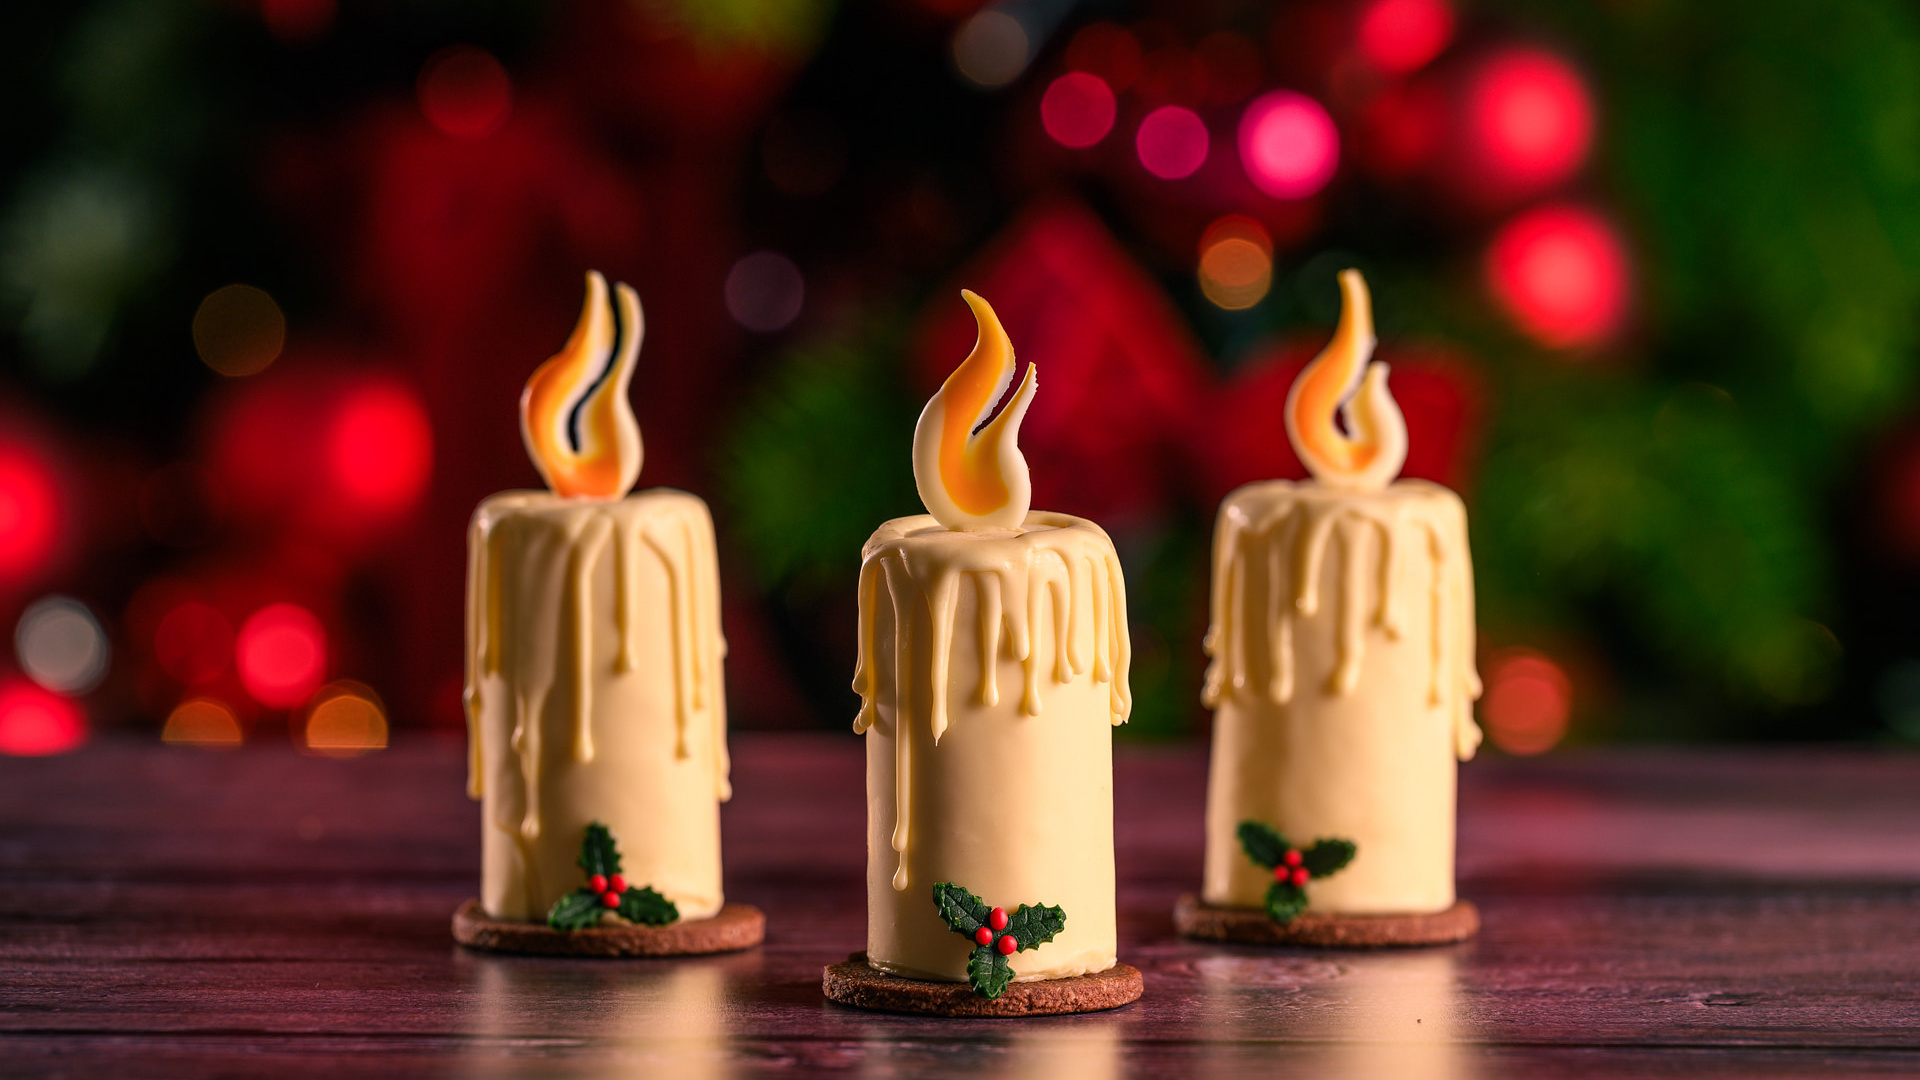 Festive Brunch_christmas_dessert_candles 2_Patrick Usseglio_Full Buyout Rights